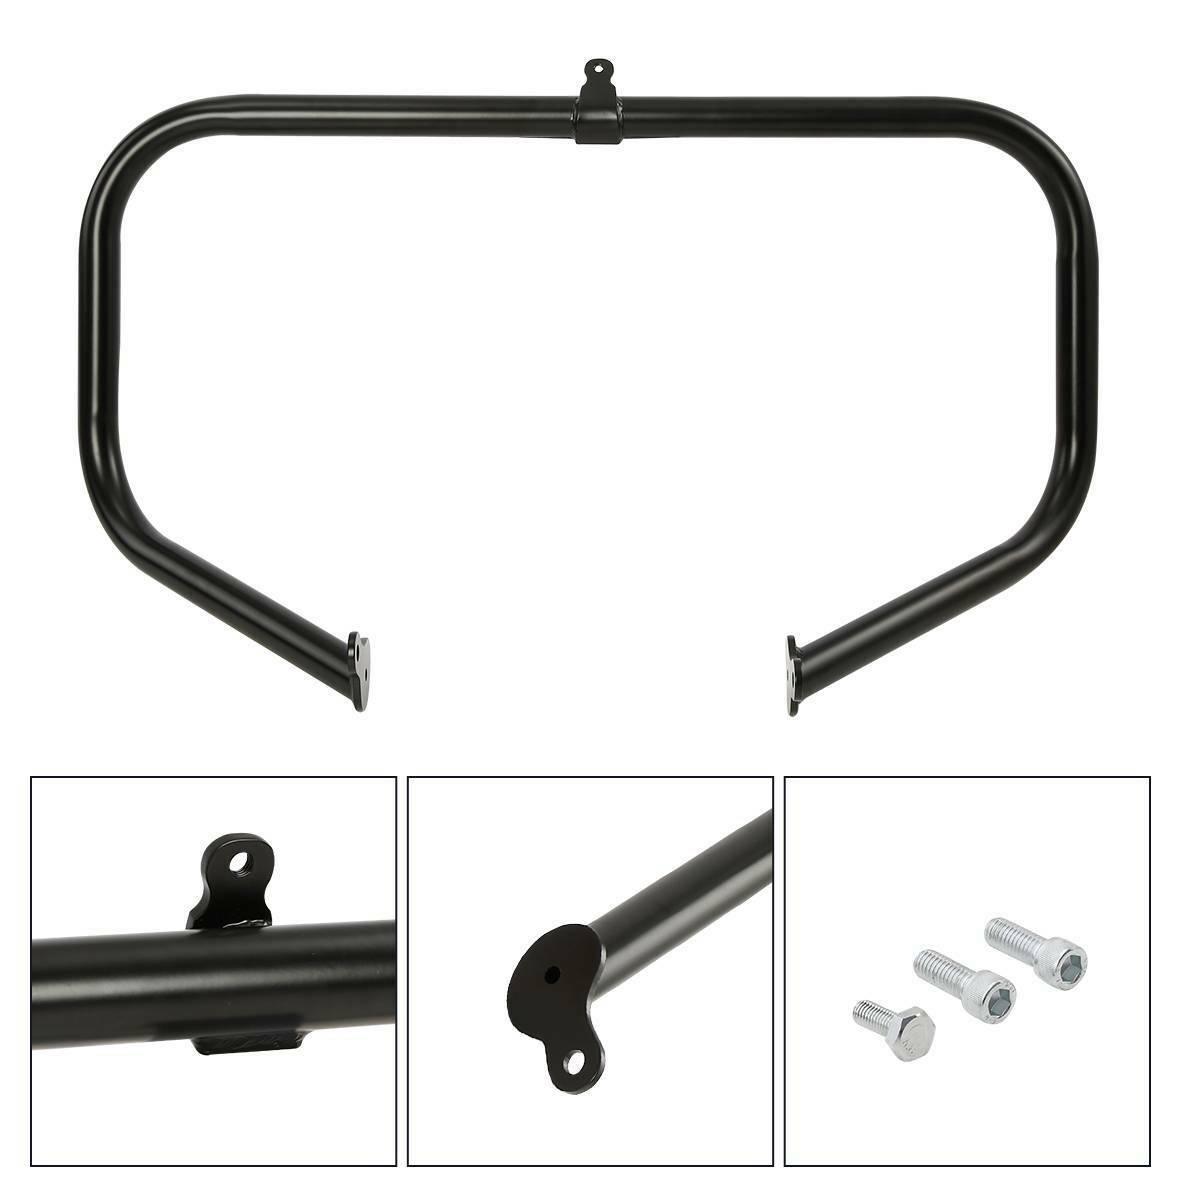 Lower Vented Leg & Water-Cooled Engine Bar Fit For Harley Touring Road Glide 14+ - Moto Life Products